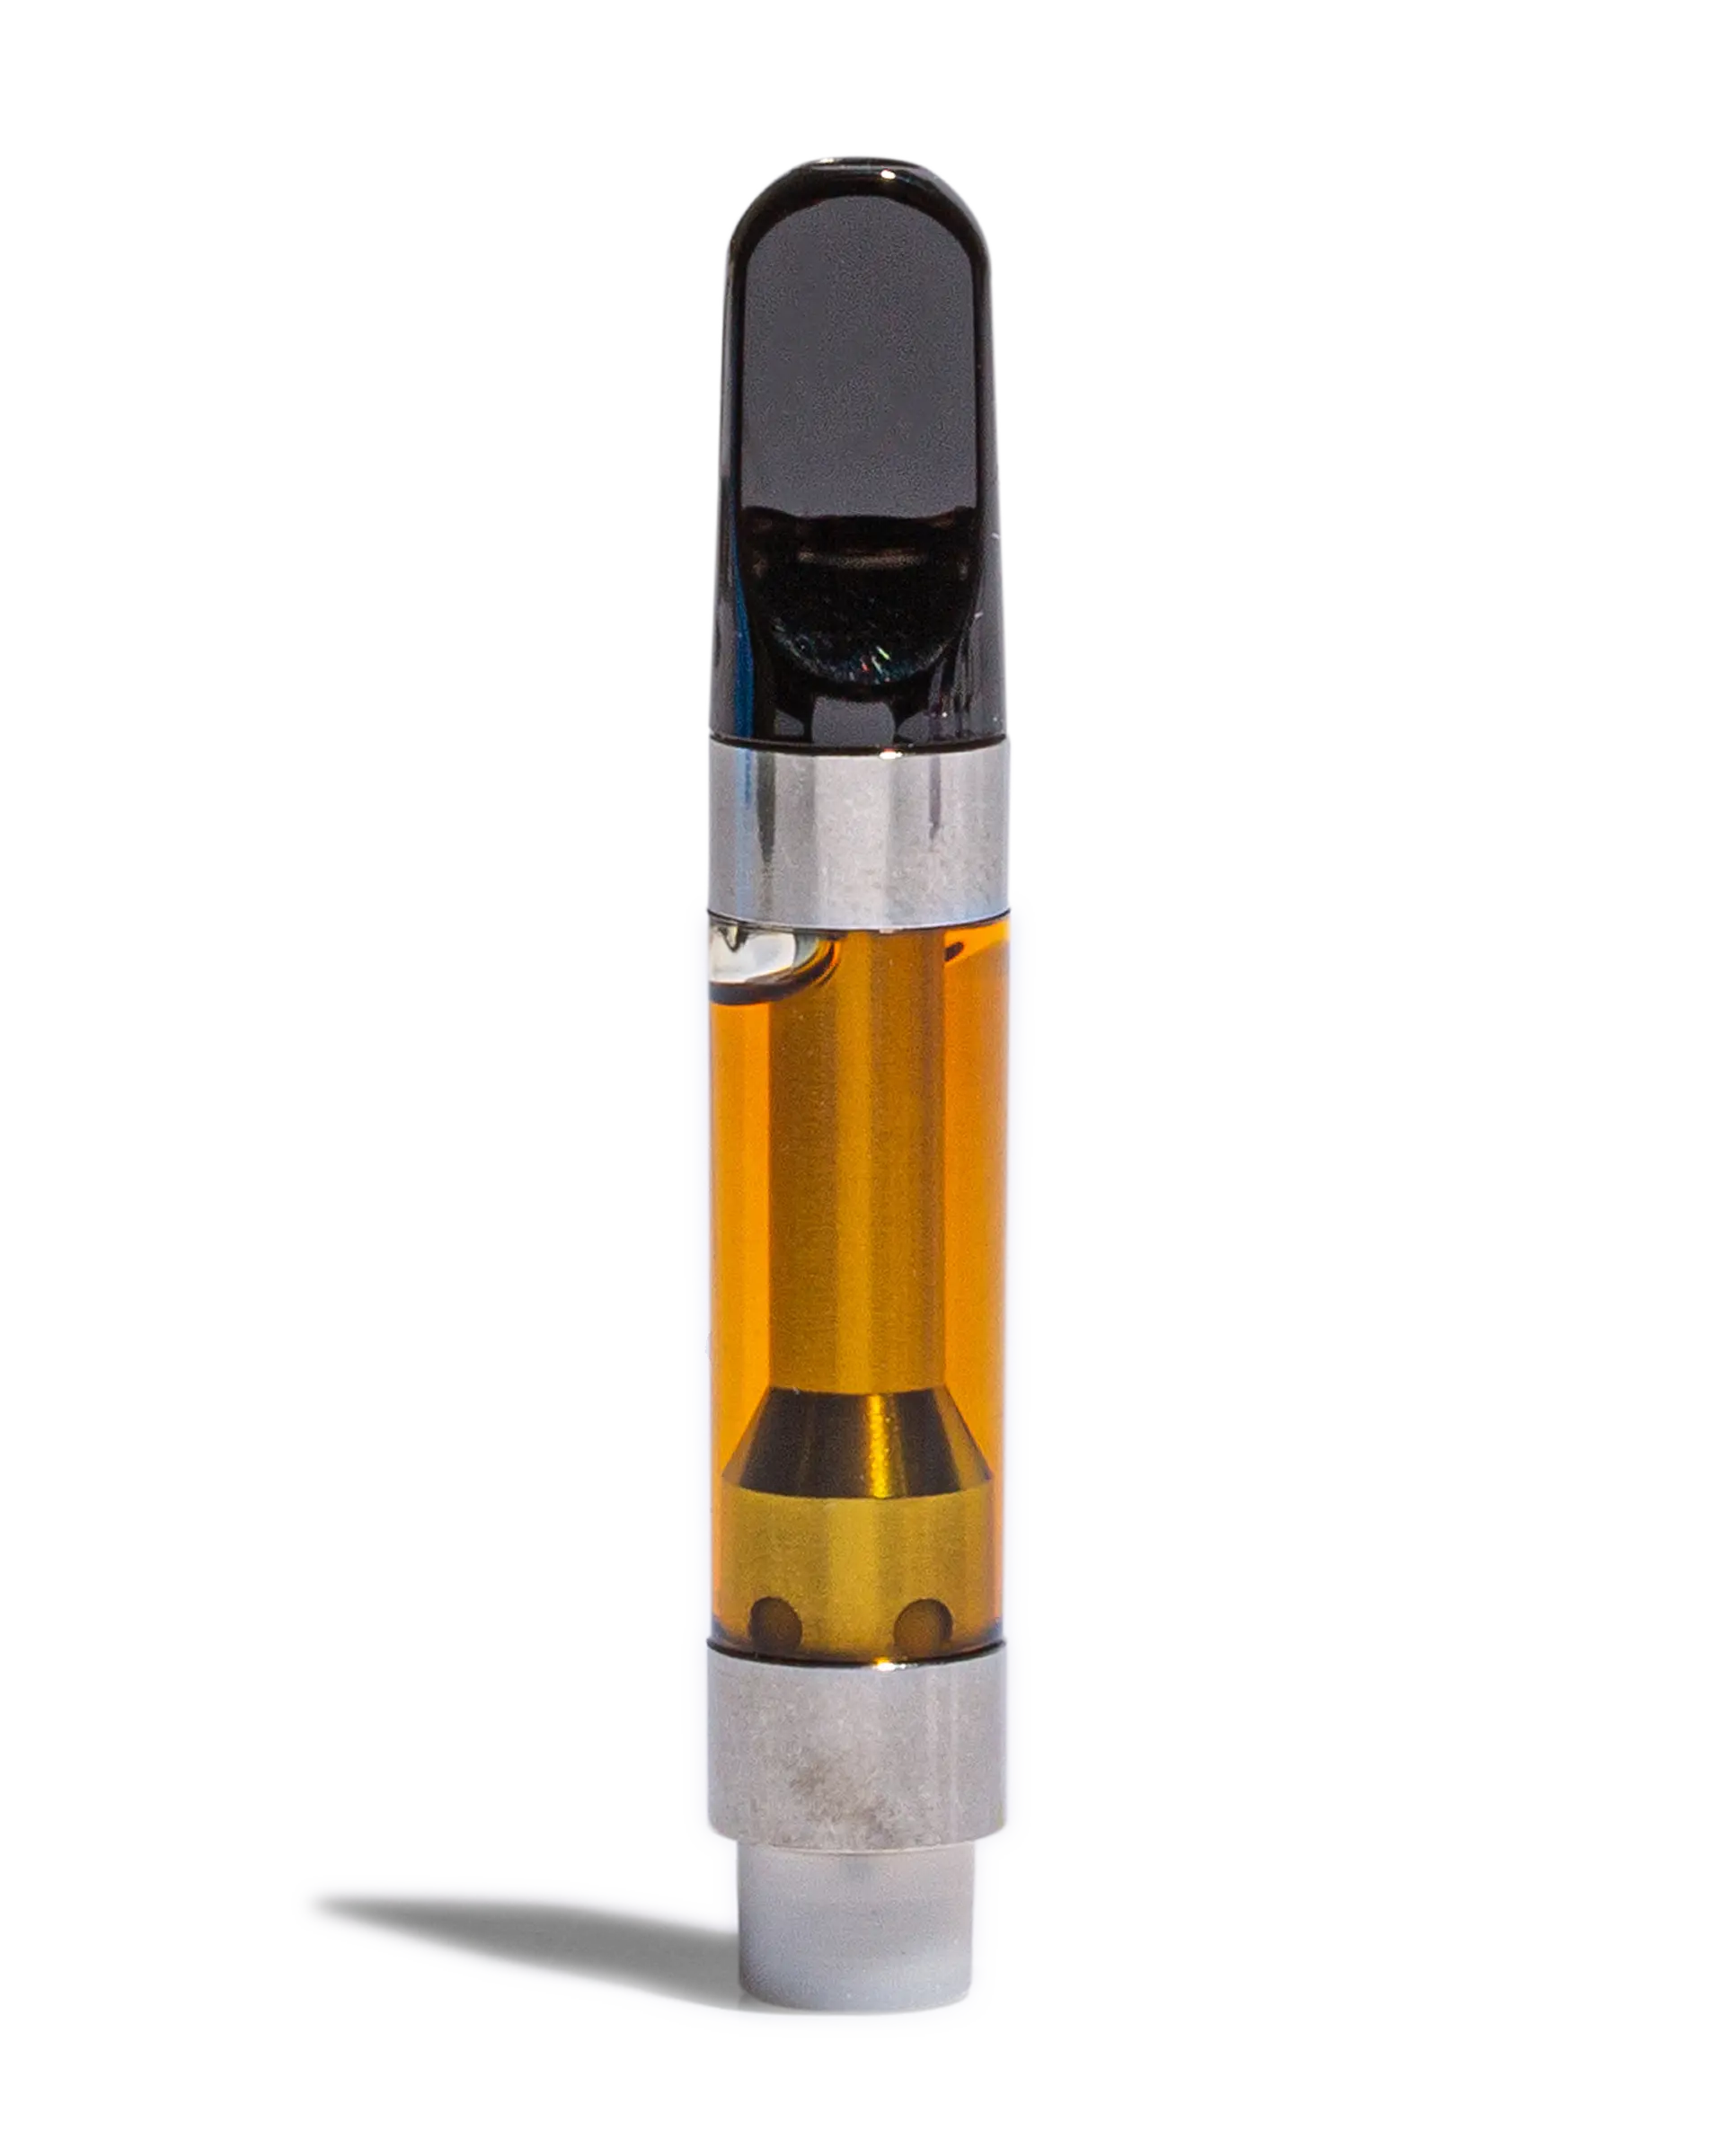 Project 41510 Live Resin Cart 1g